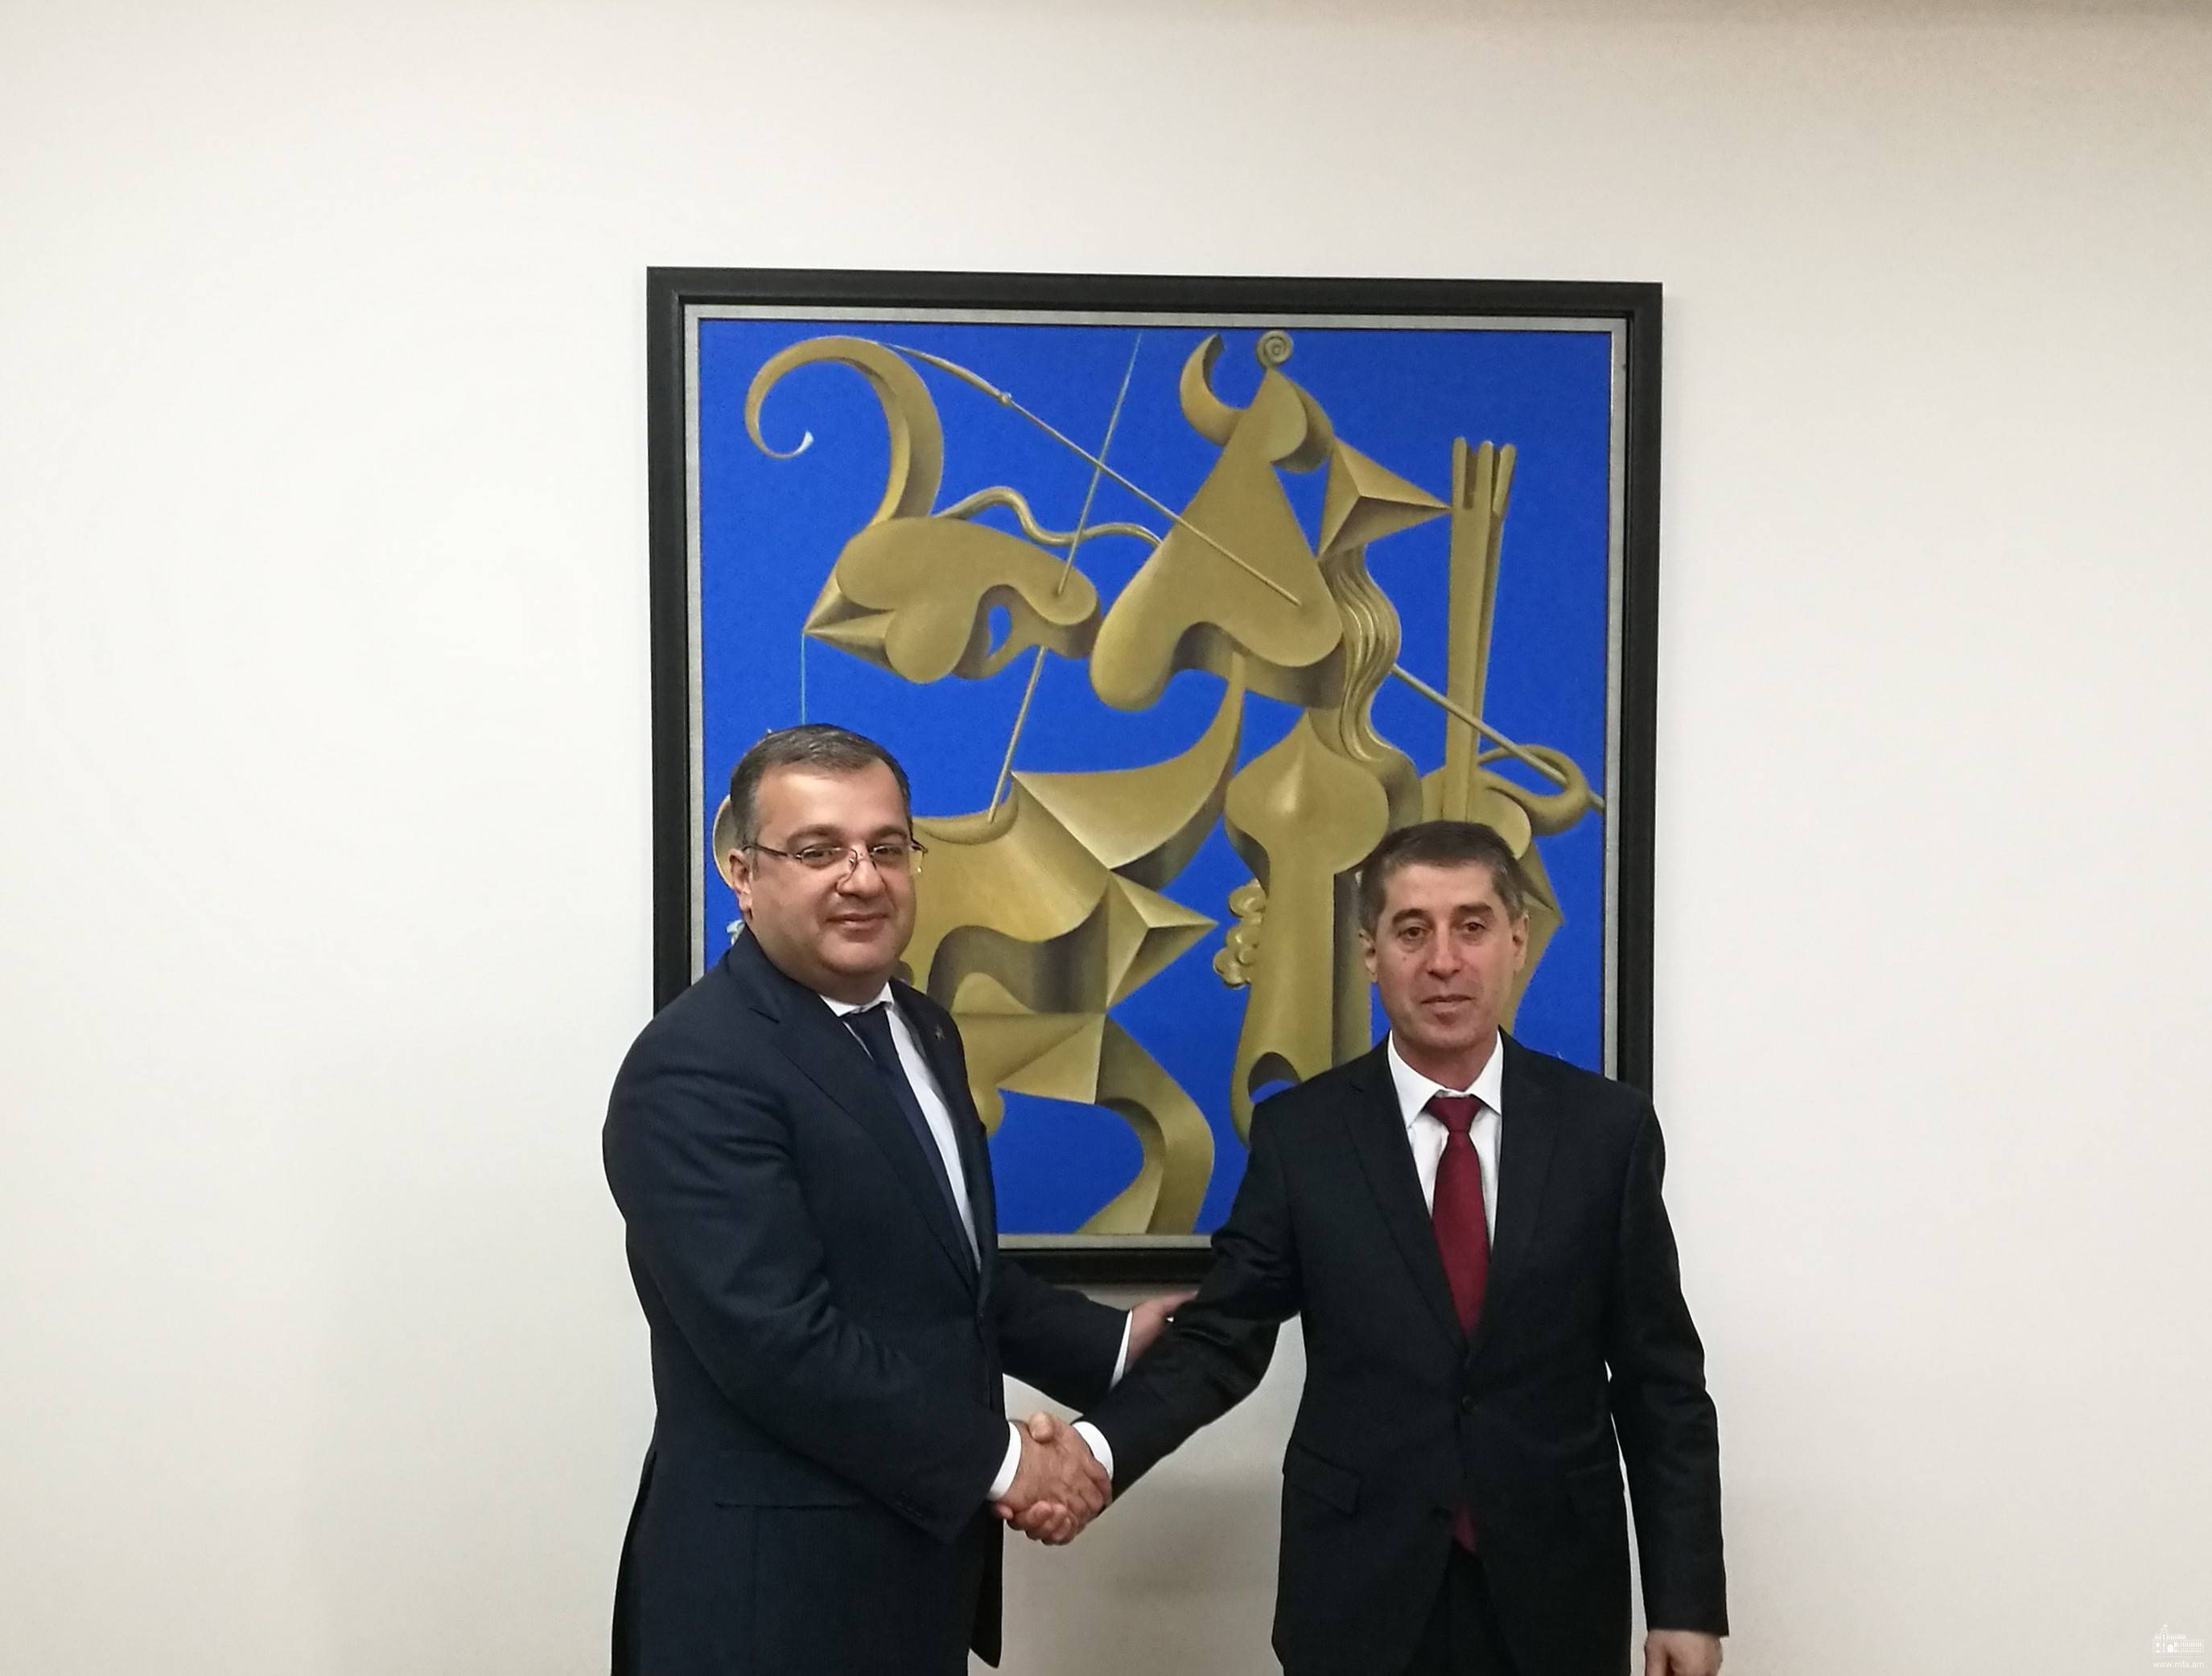 Meeting of Deputy Minister of Foreign Affairs of Armenia with the Director of the SCO Executive Committee of the Regional Anti-Terrorist Structure (RATS)